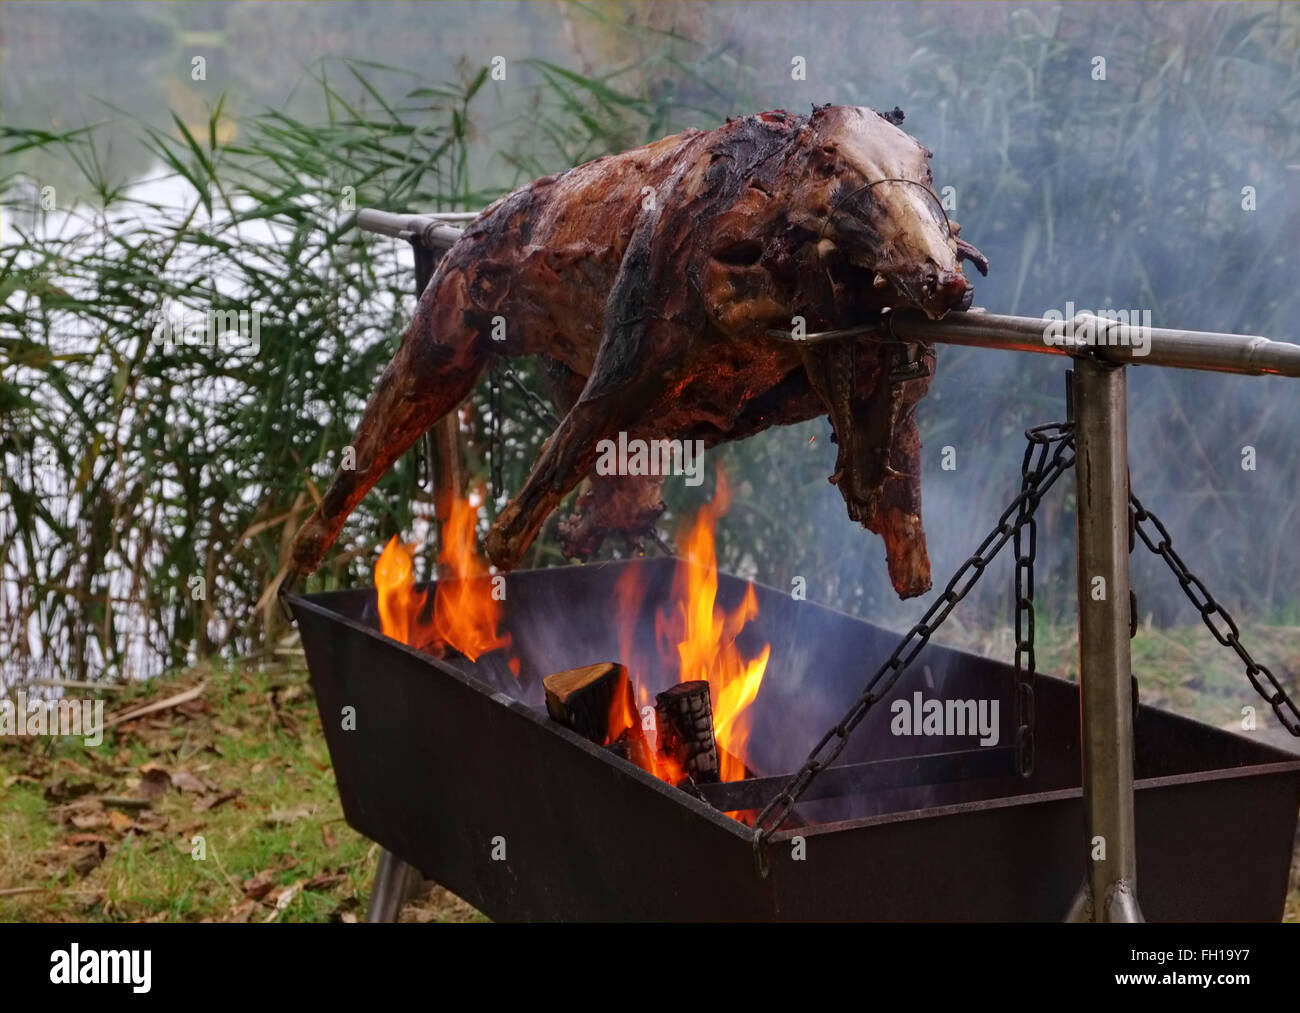 Wildschwein am Spiess - traditional wild boar on spit and wooden fire Stock Photo